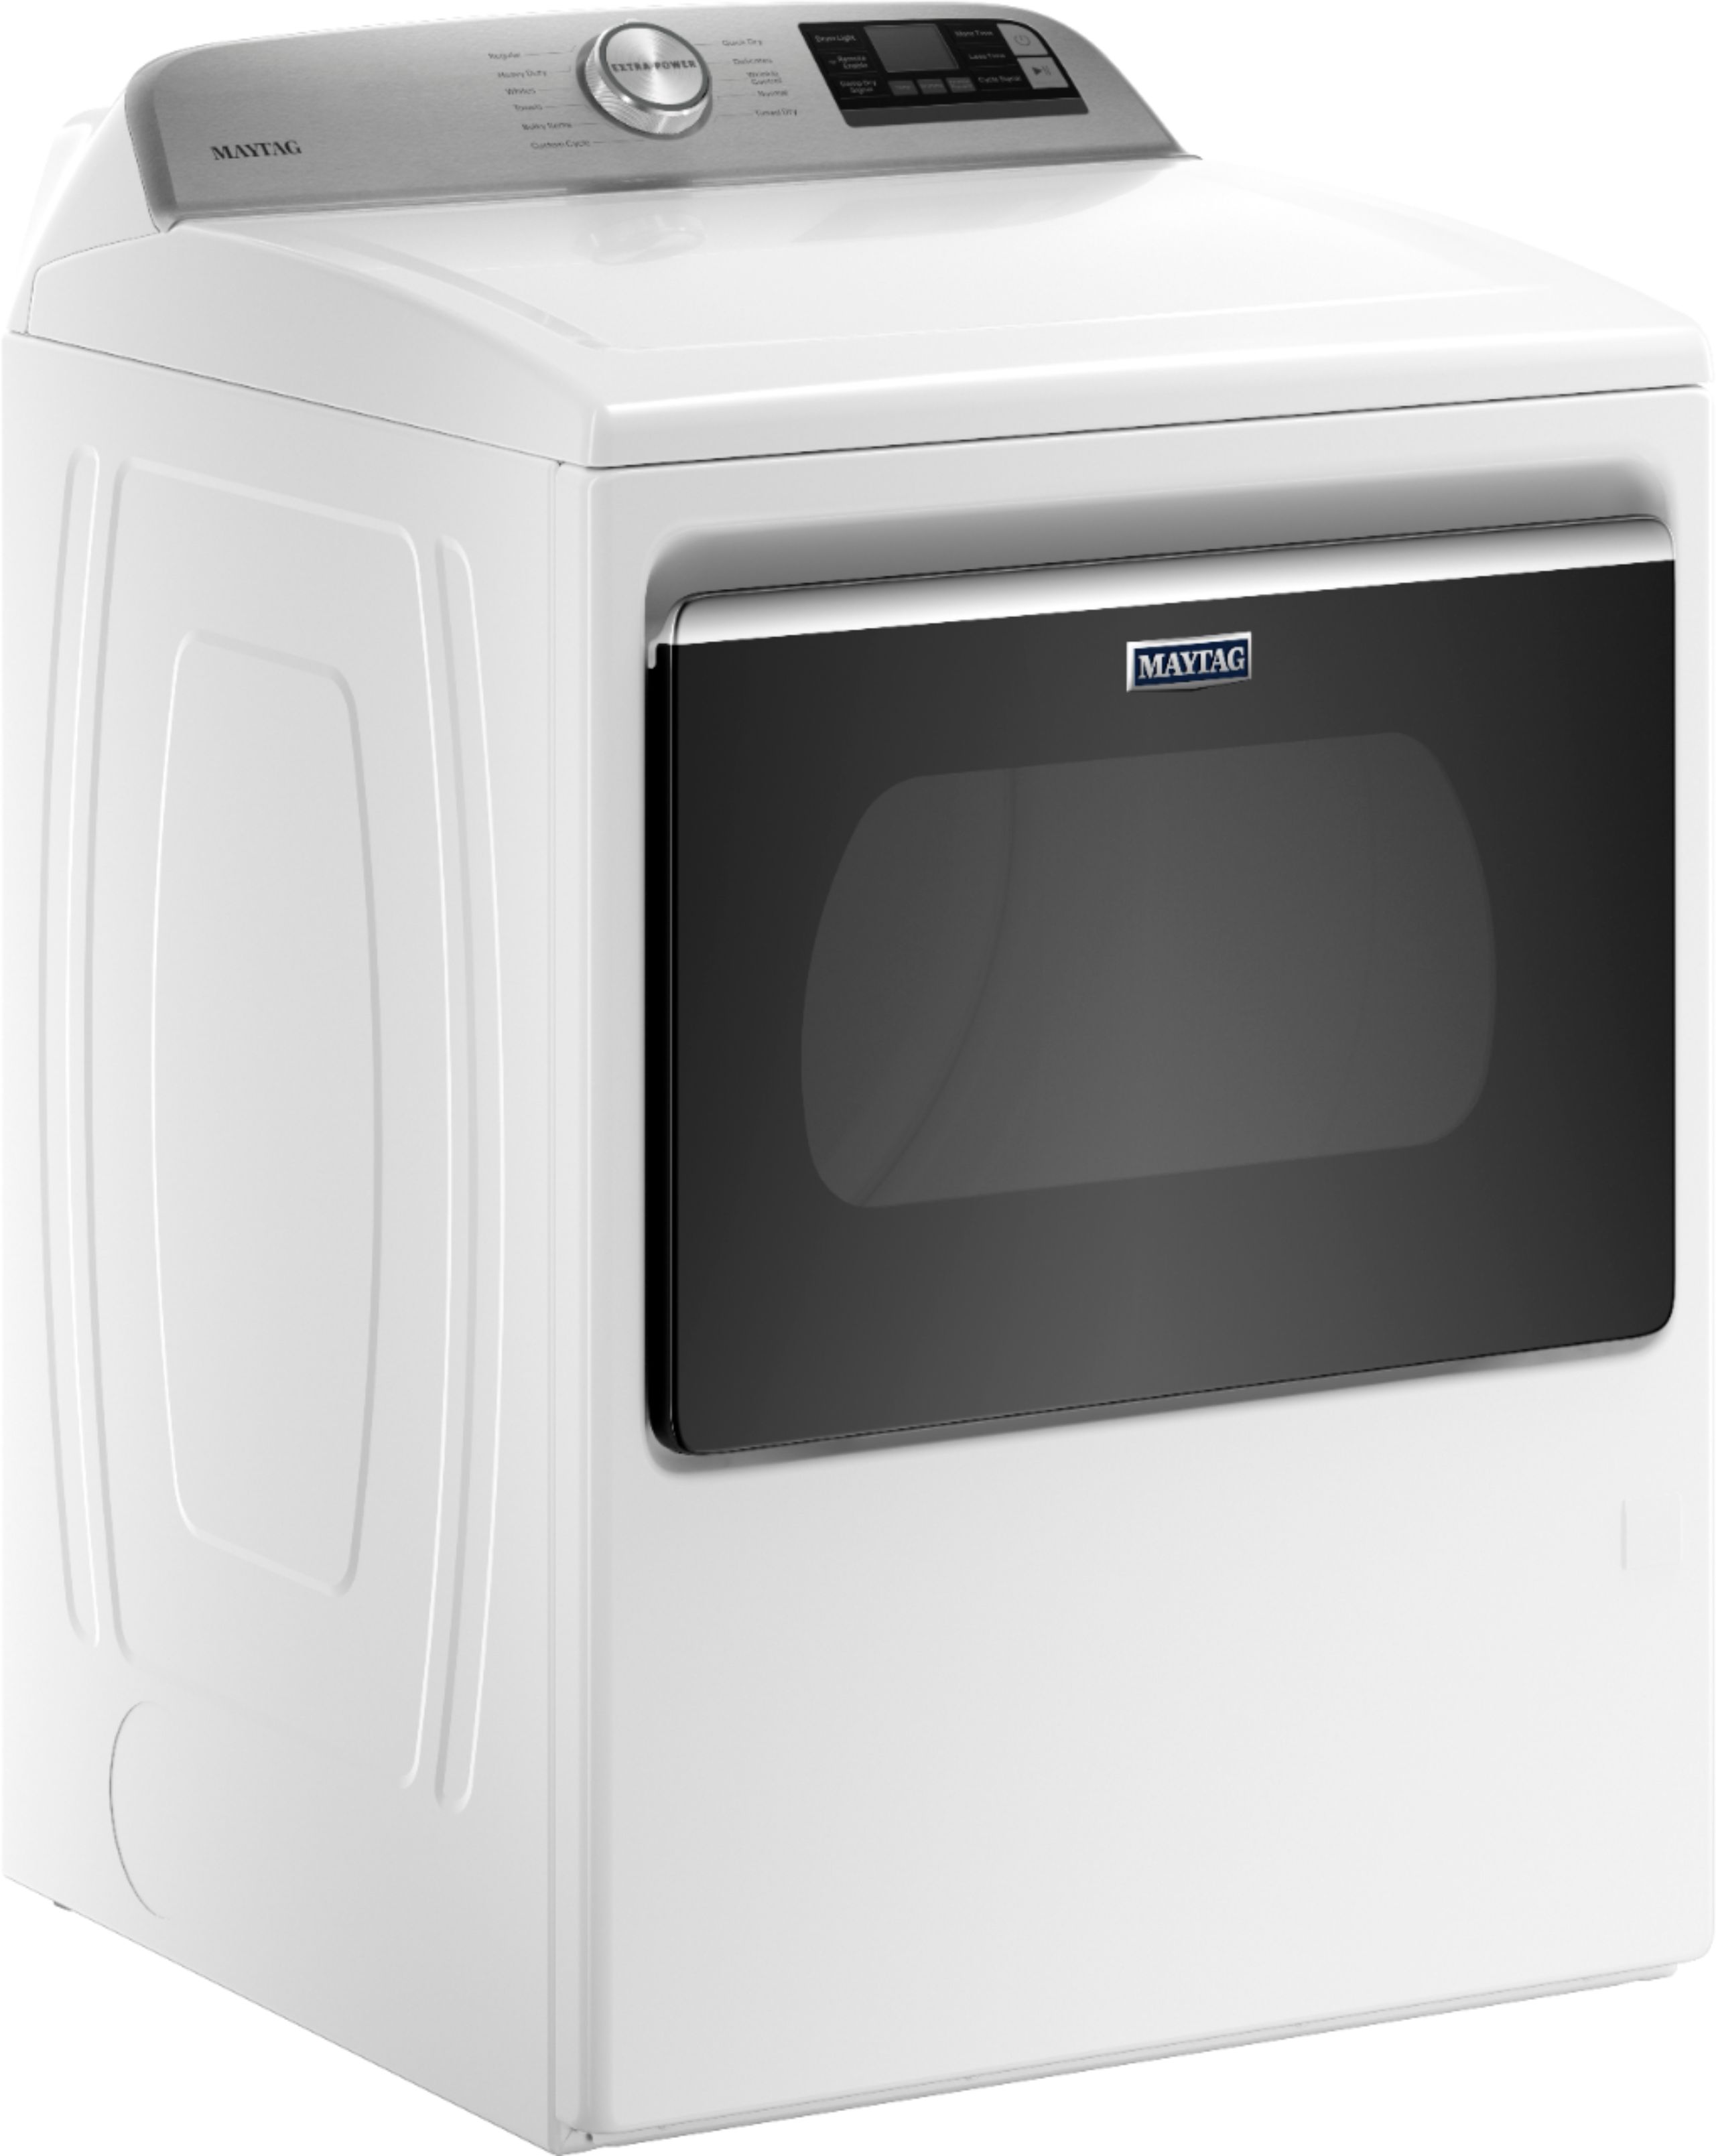 Angle View: Maytag - 7.4 Cu. Ft. Smart Gas Dryer with Extra Power Button - White